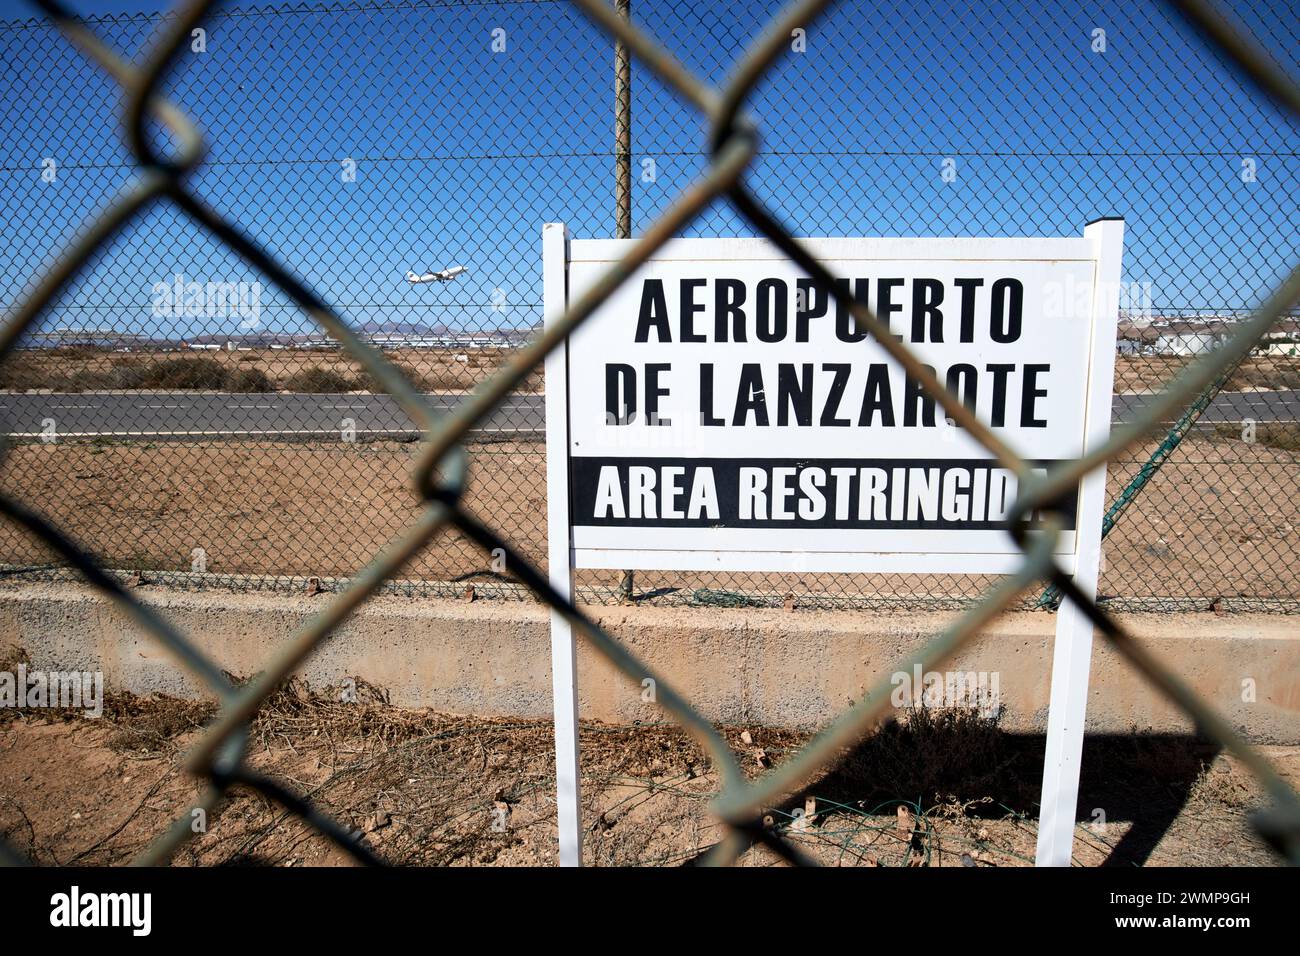 restricted area sign on perimeter fence at ace arrecife airport with aircraft taking off Lanzarote, Canary Islands, spain Stock Photo